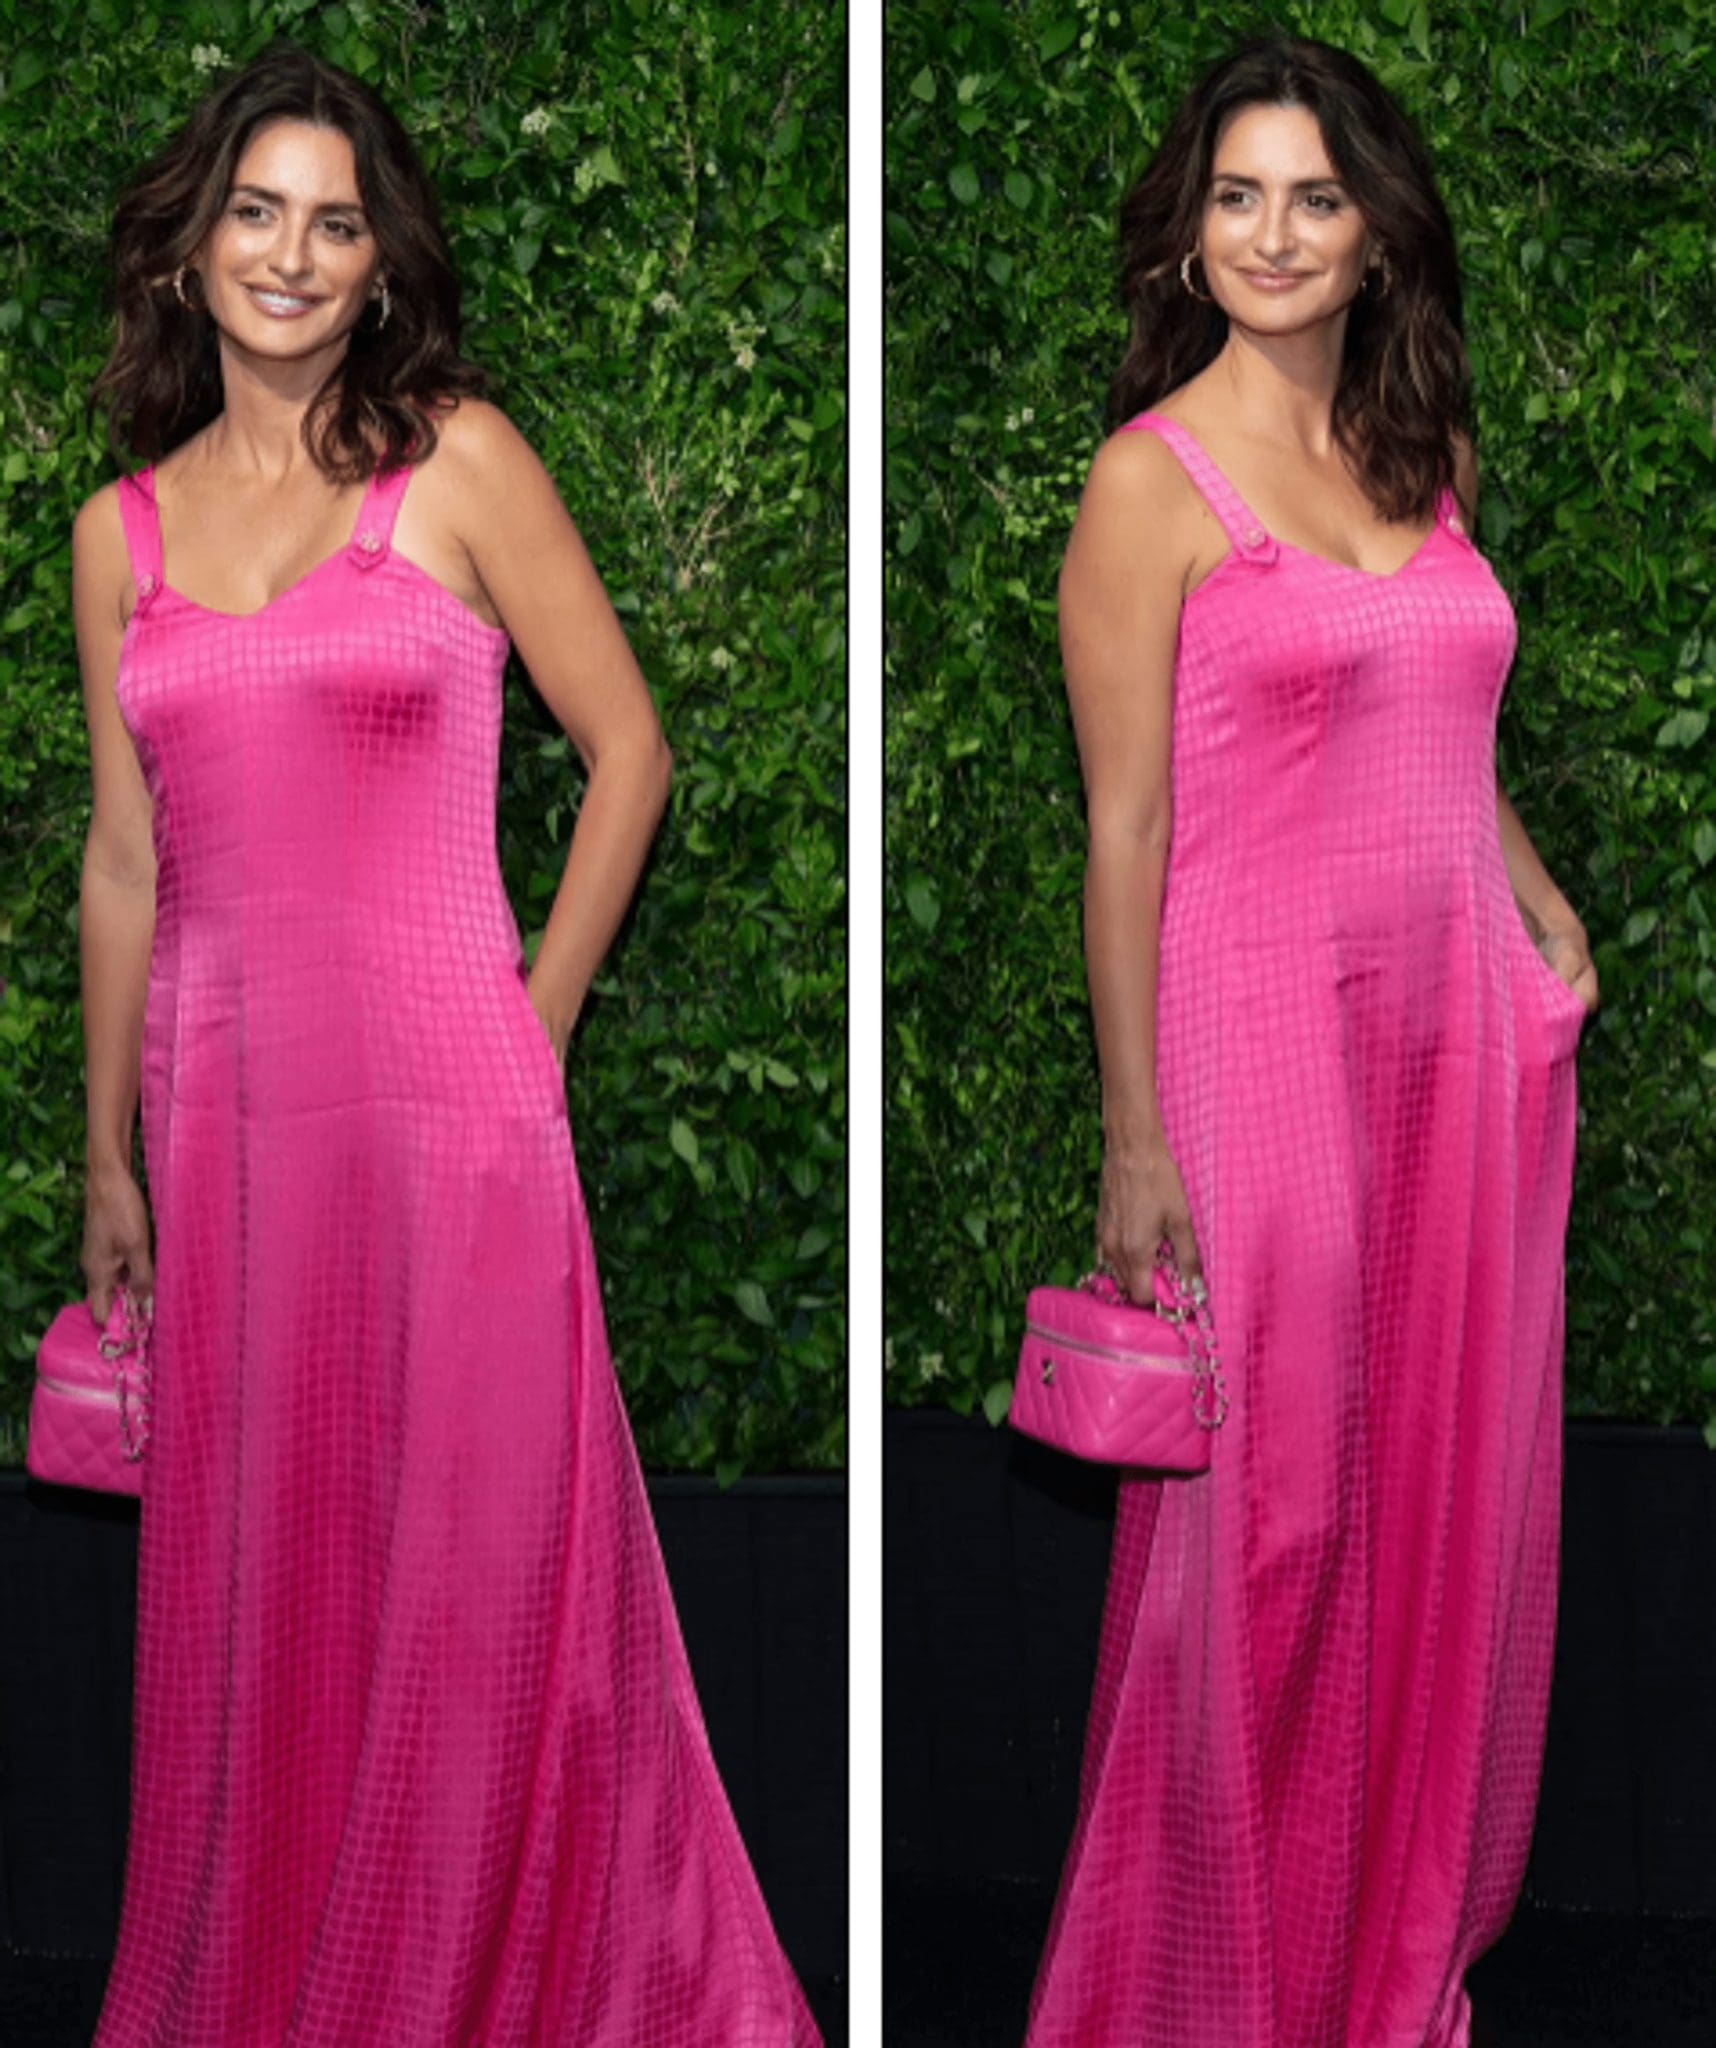 Penelope Cruz, in a hot pink dress, headed the red carpet of the gala dinner in New York